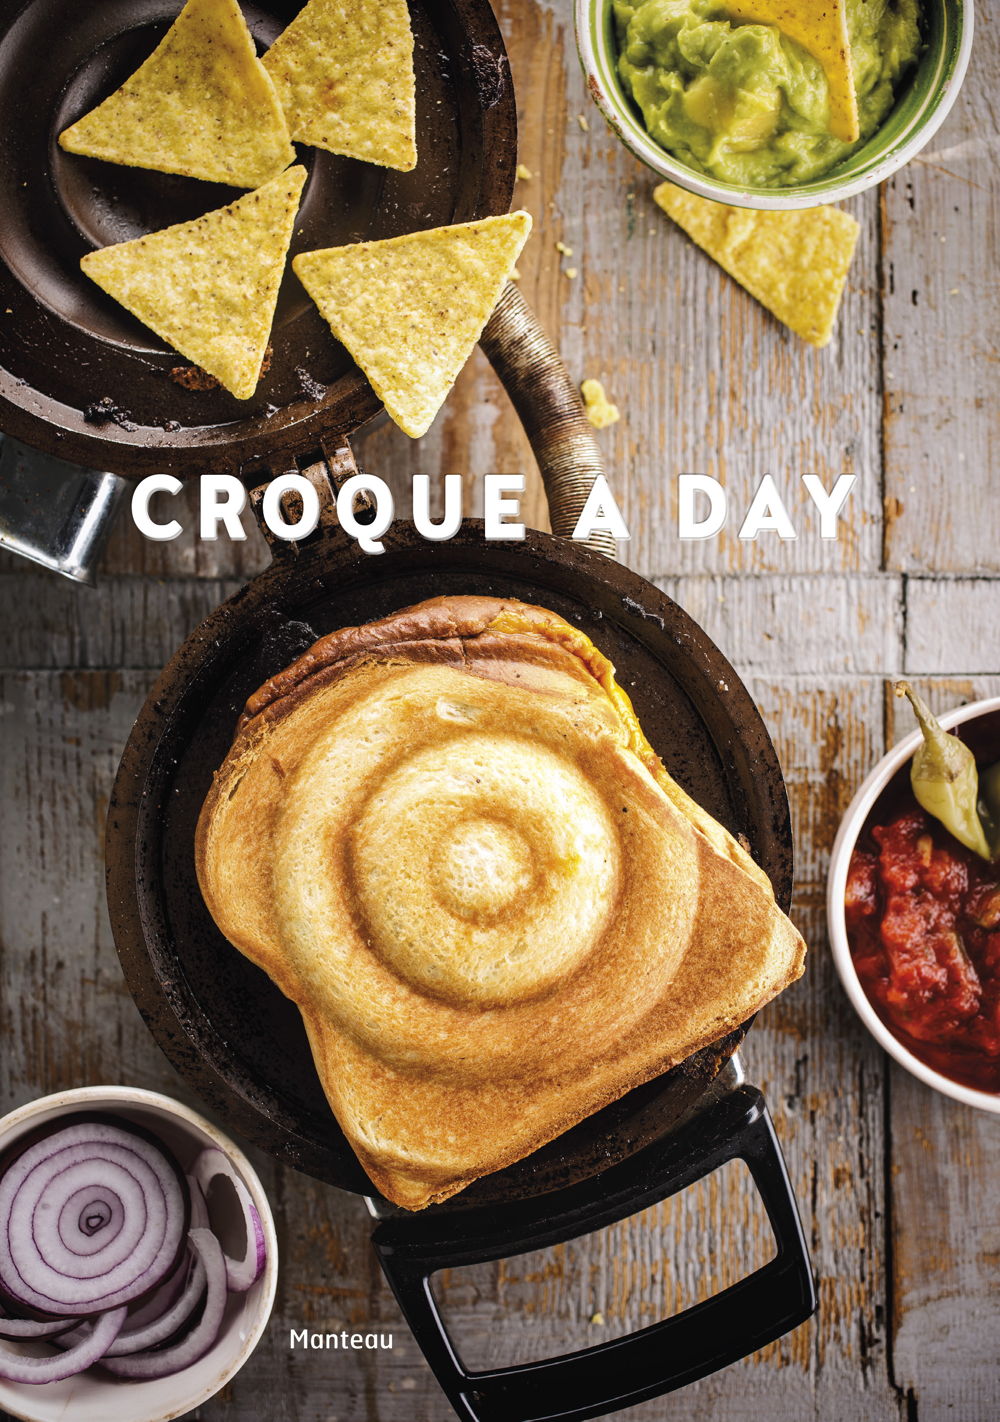 Cover 'Croque a day'